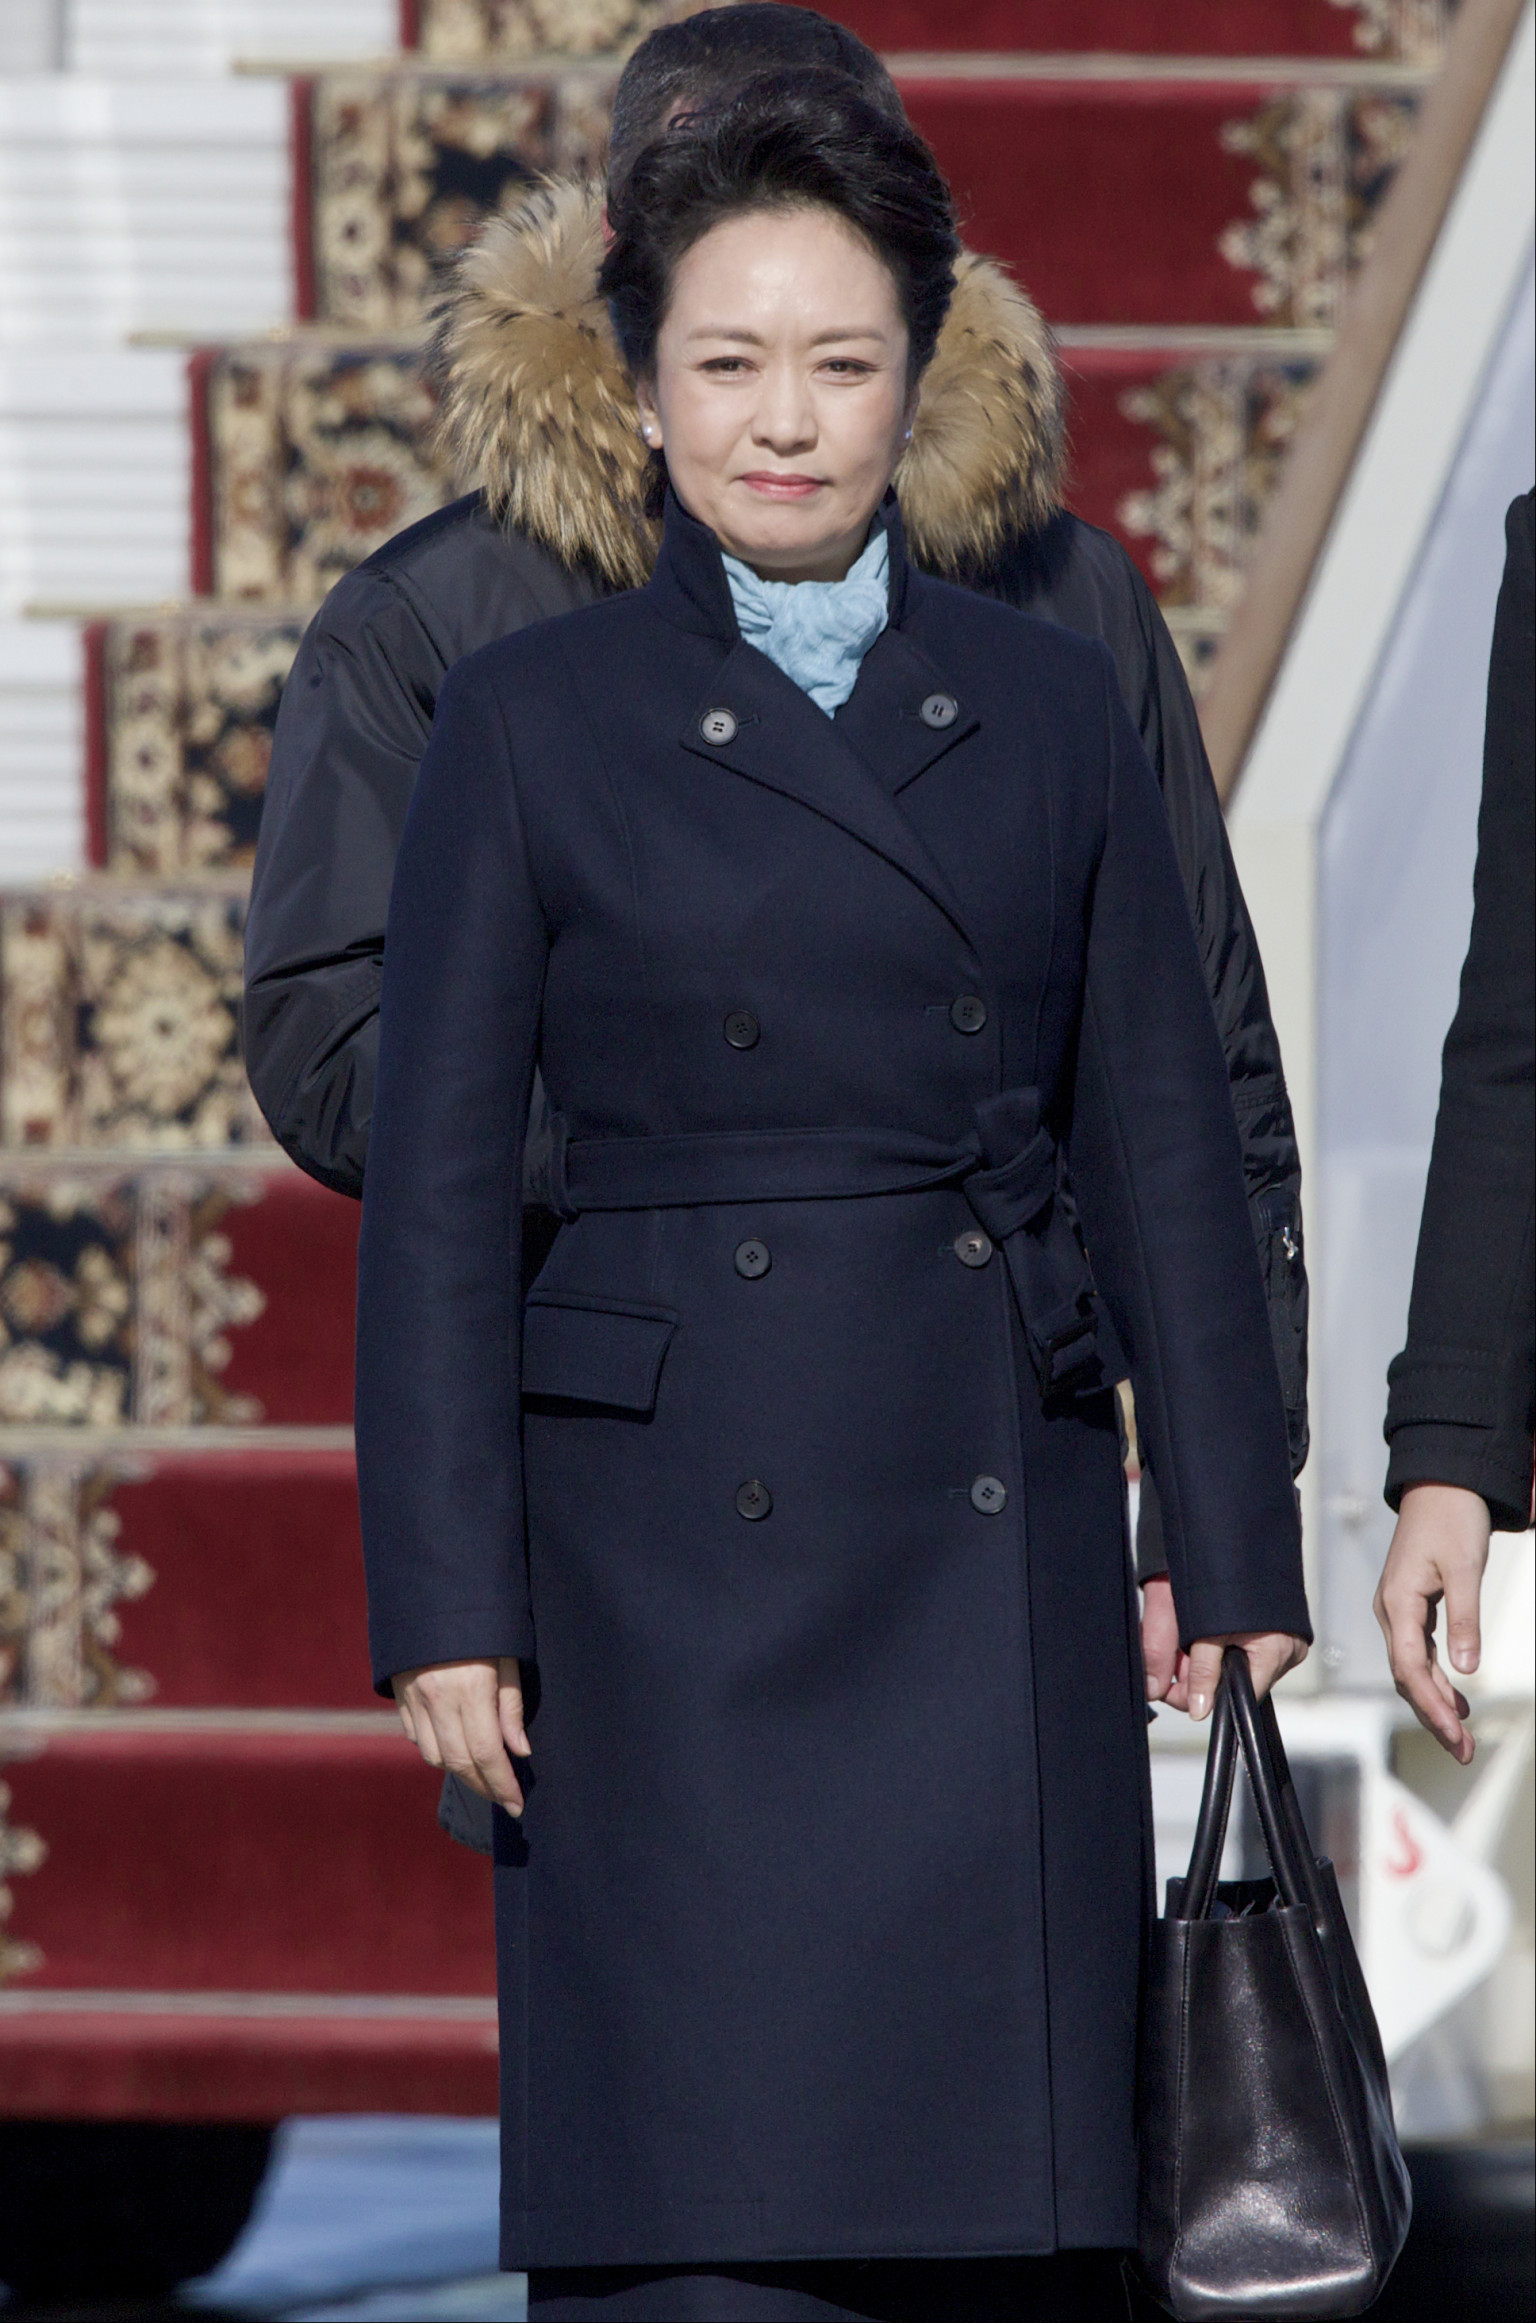 Peng Liyuan Is Best-Dressed First Lady, Vanity Fair Says (PHOTOS) | HuffPost